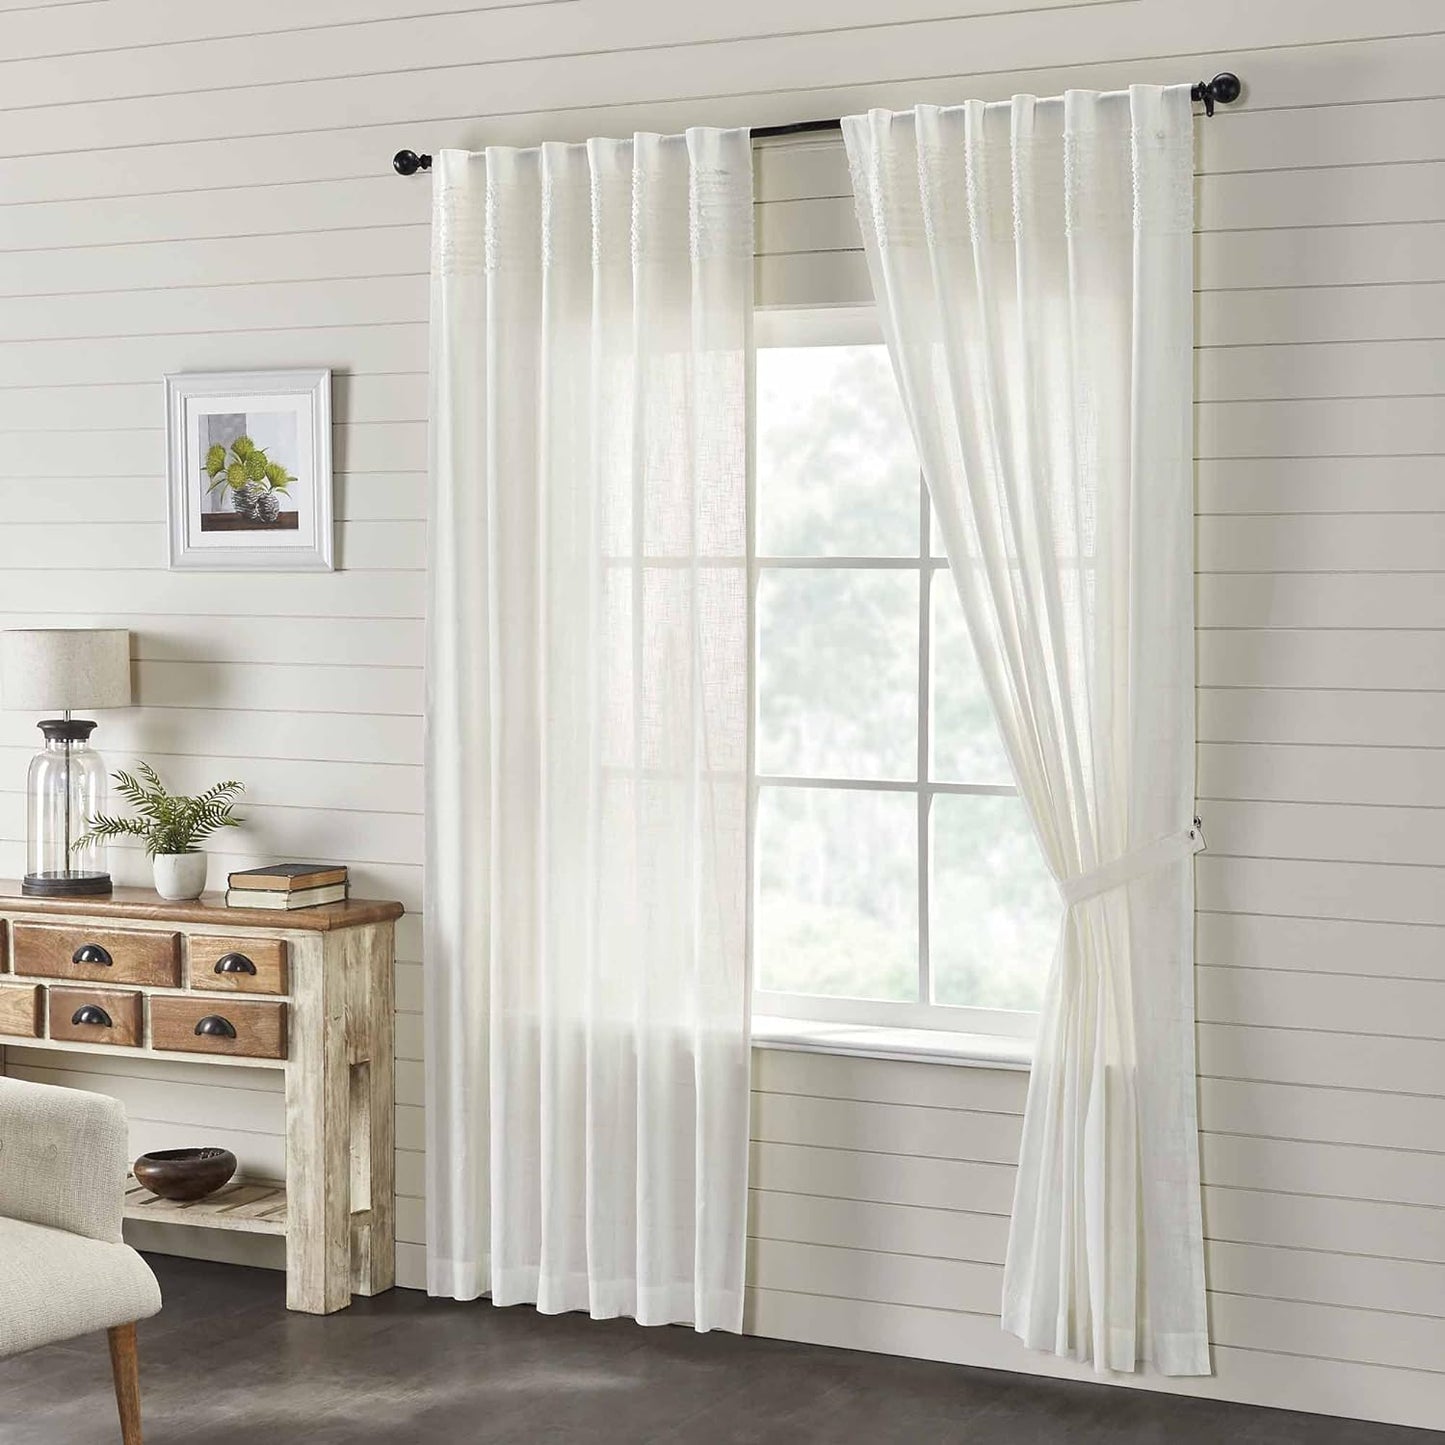 Kathryn Tier Curtains, Set of 2, 24" Long, Ruffled Curtains in a Linen-Look Soft White Cotton Semi-Sheer Fabric, Farmhouse, Cottage, Country Style Sheer Kitchen Café Curtains  Piper Classics 84" Panels  